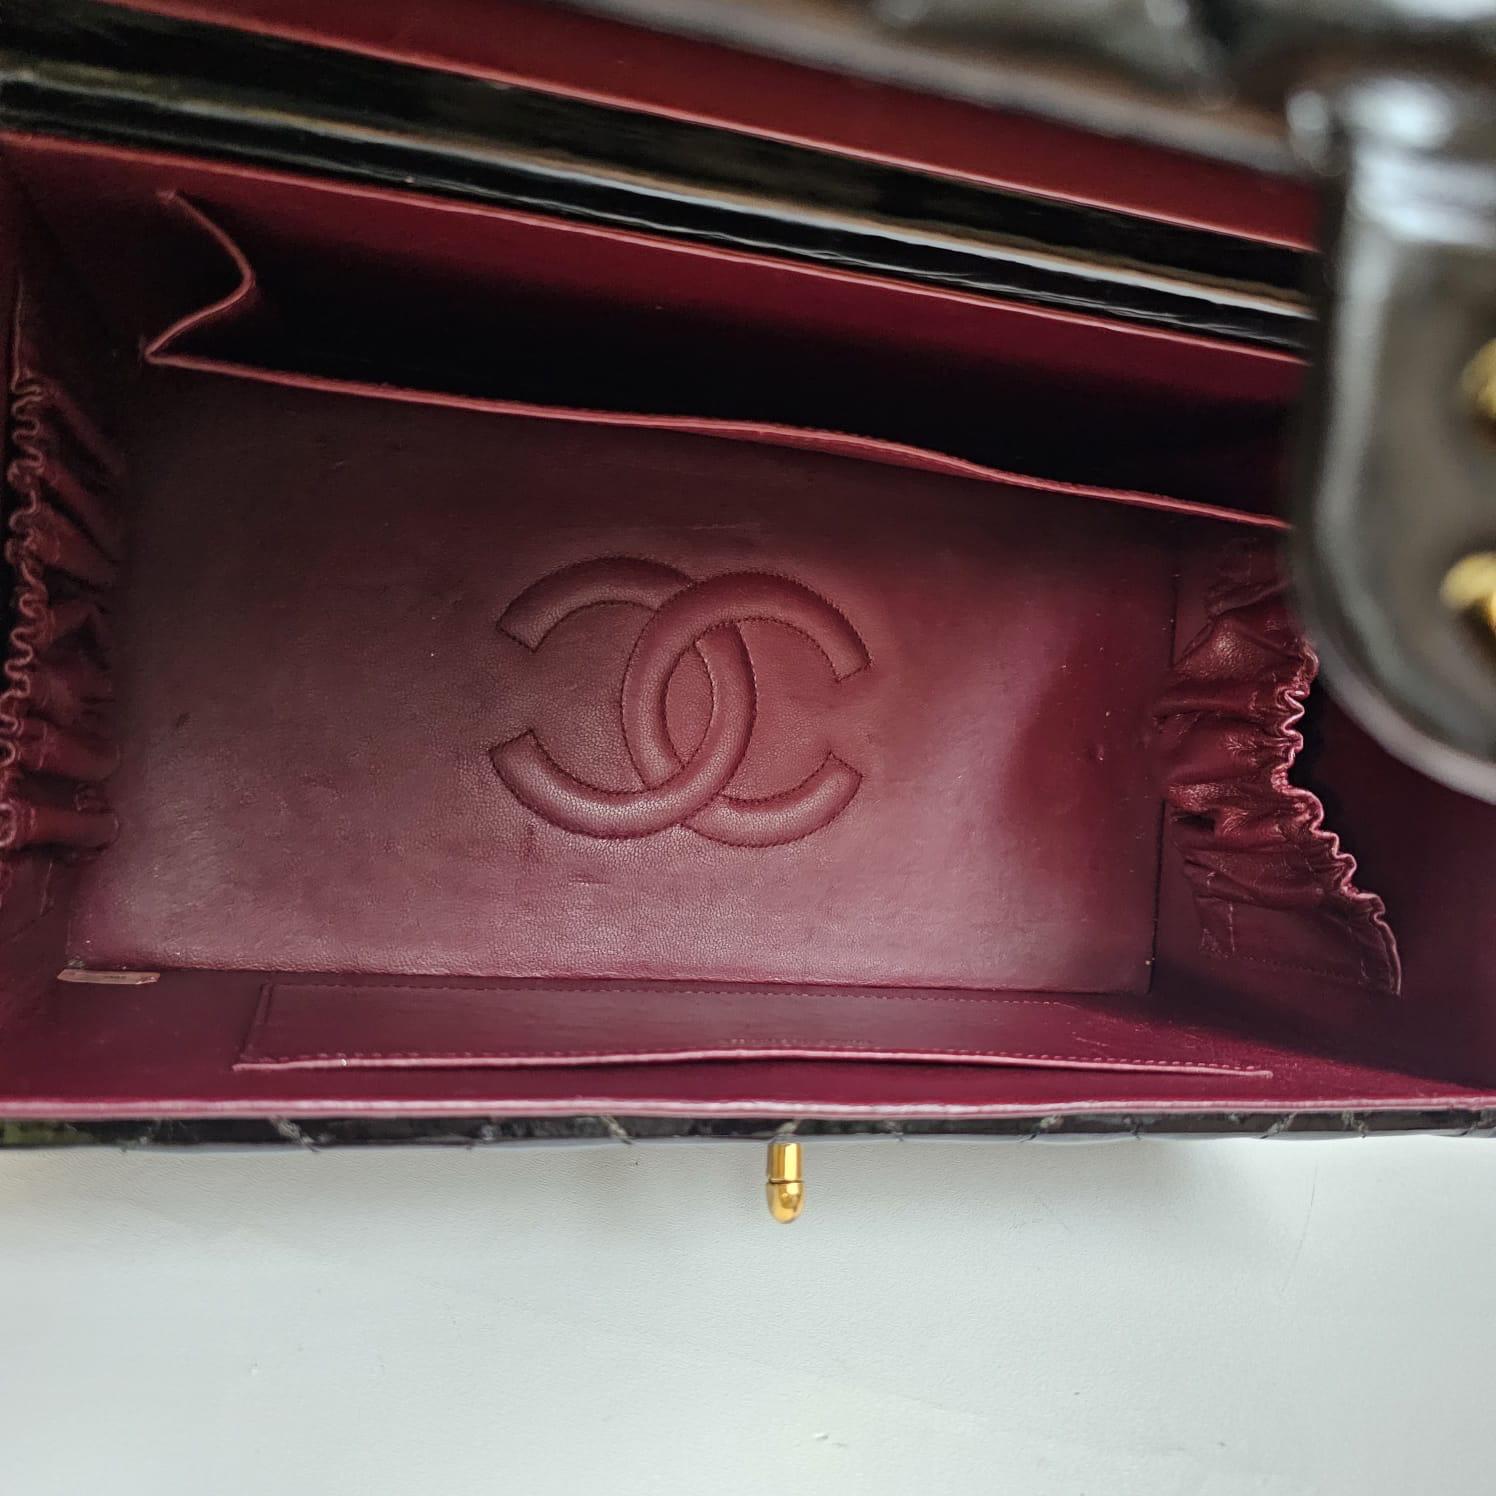 Rare vintage patent vanity box in black with gold hardware. Rare collectors item. Overall still in great vintage condition with minor marks due to storage. Faint clouding on the patent surface. Handles has slightly bent due to pressure during